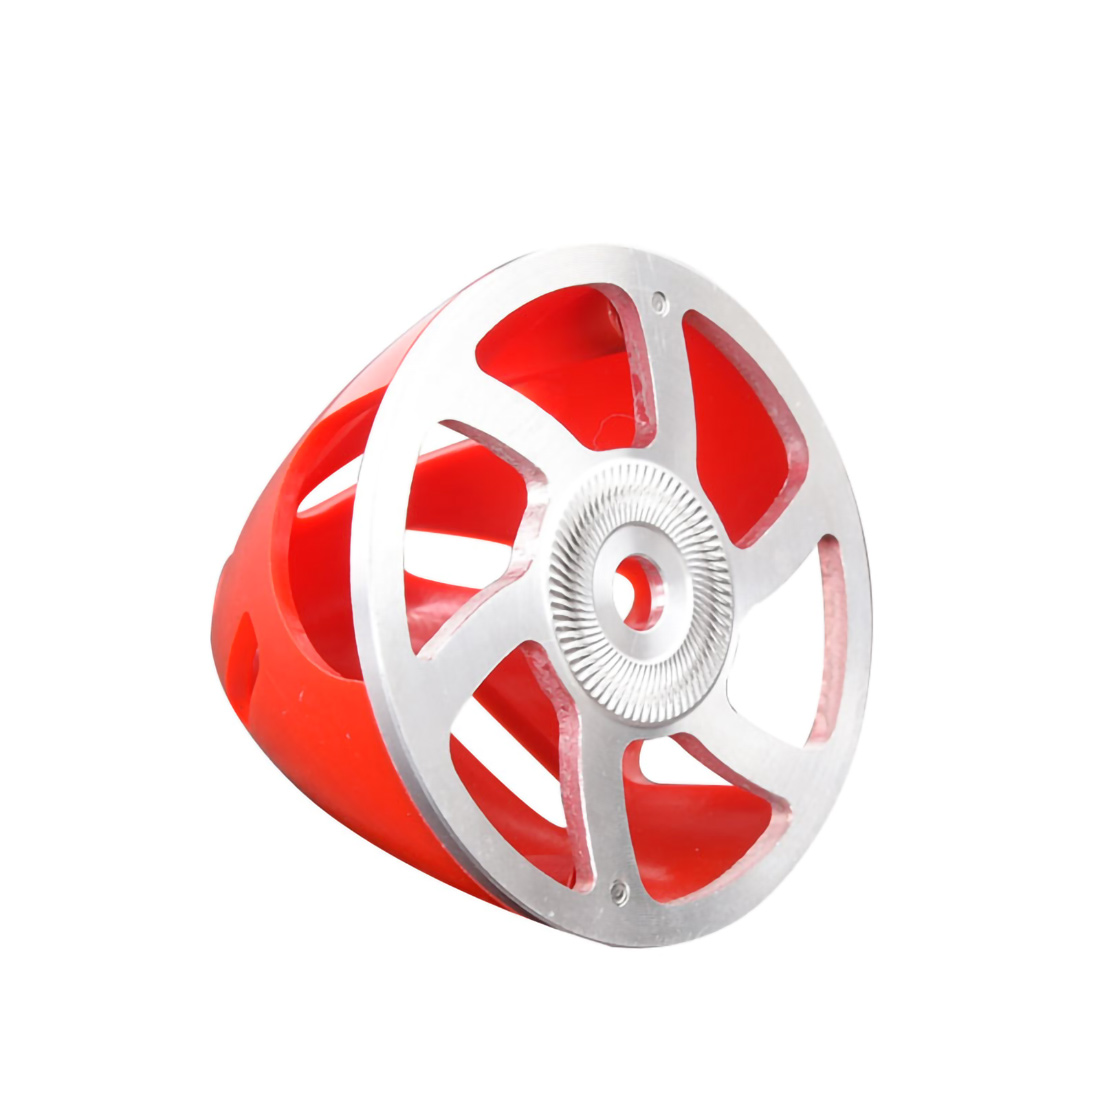 Gemfan 82mm Hollow Plastic Propeller Spinner With Aluminum Alloy Base 5 Colors